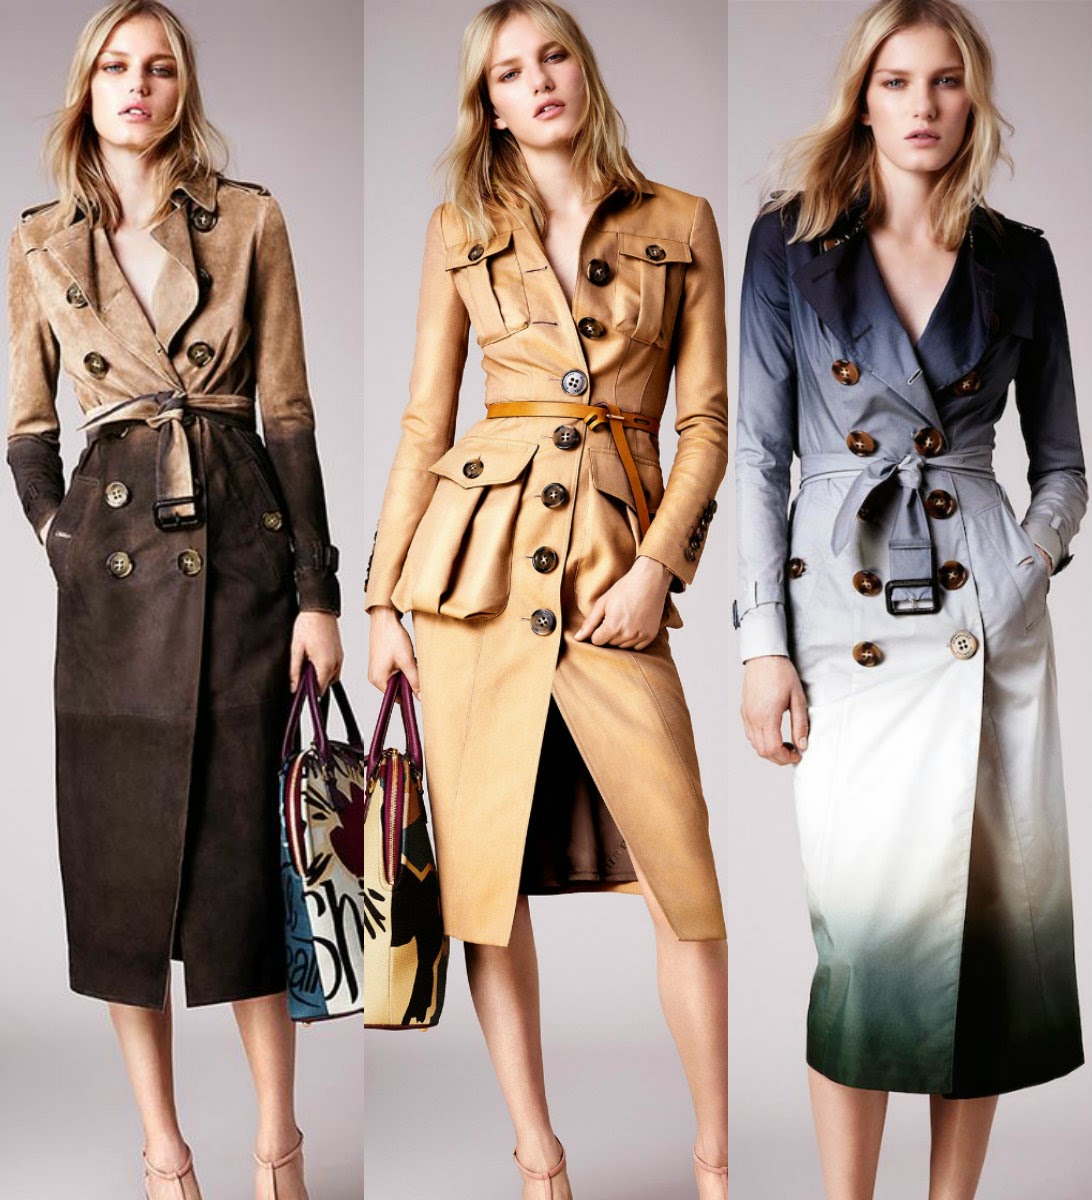 Club Fashionista: Fashion Trends: How to Find Your Perfect Coat